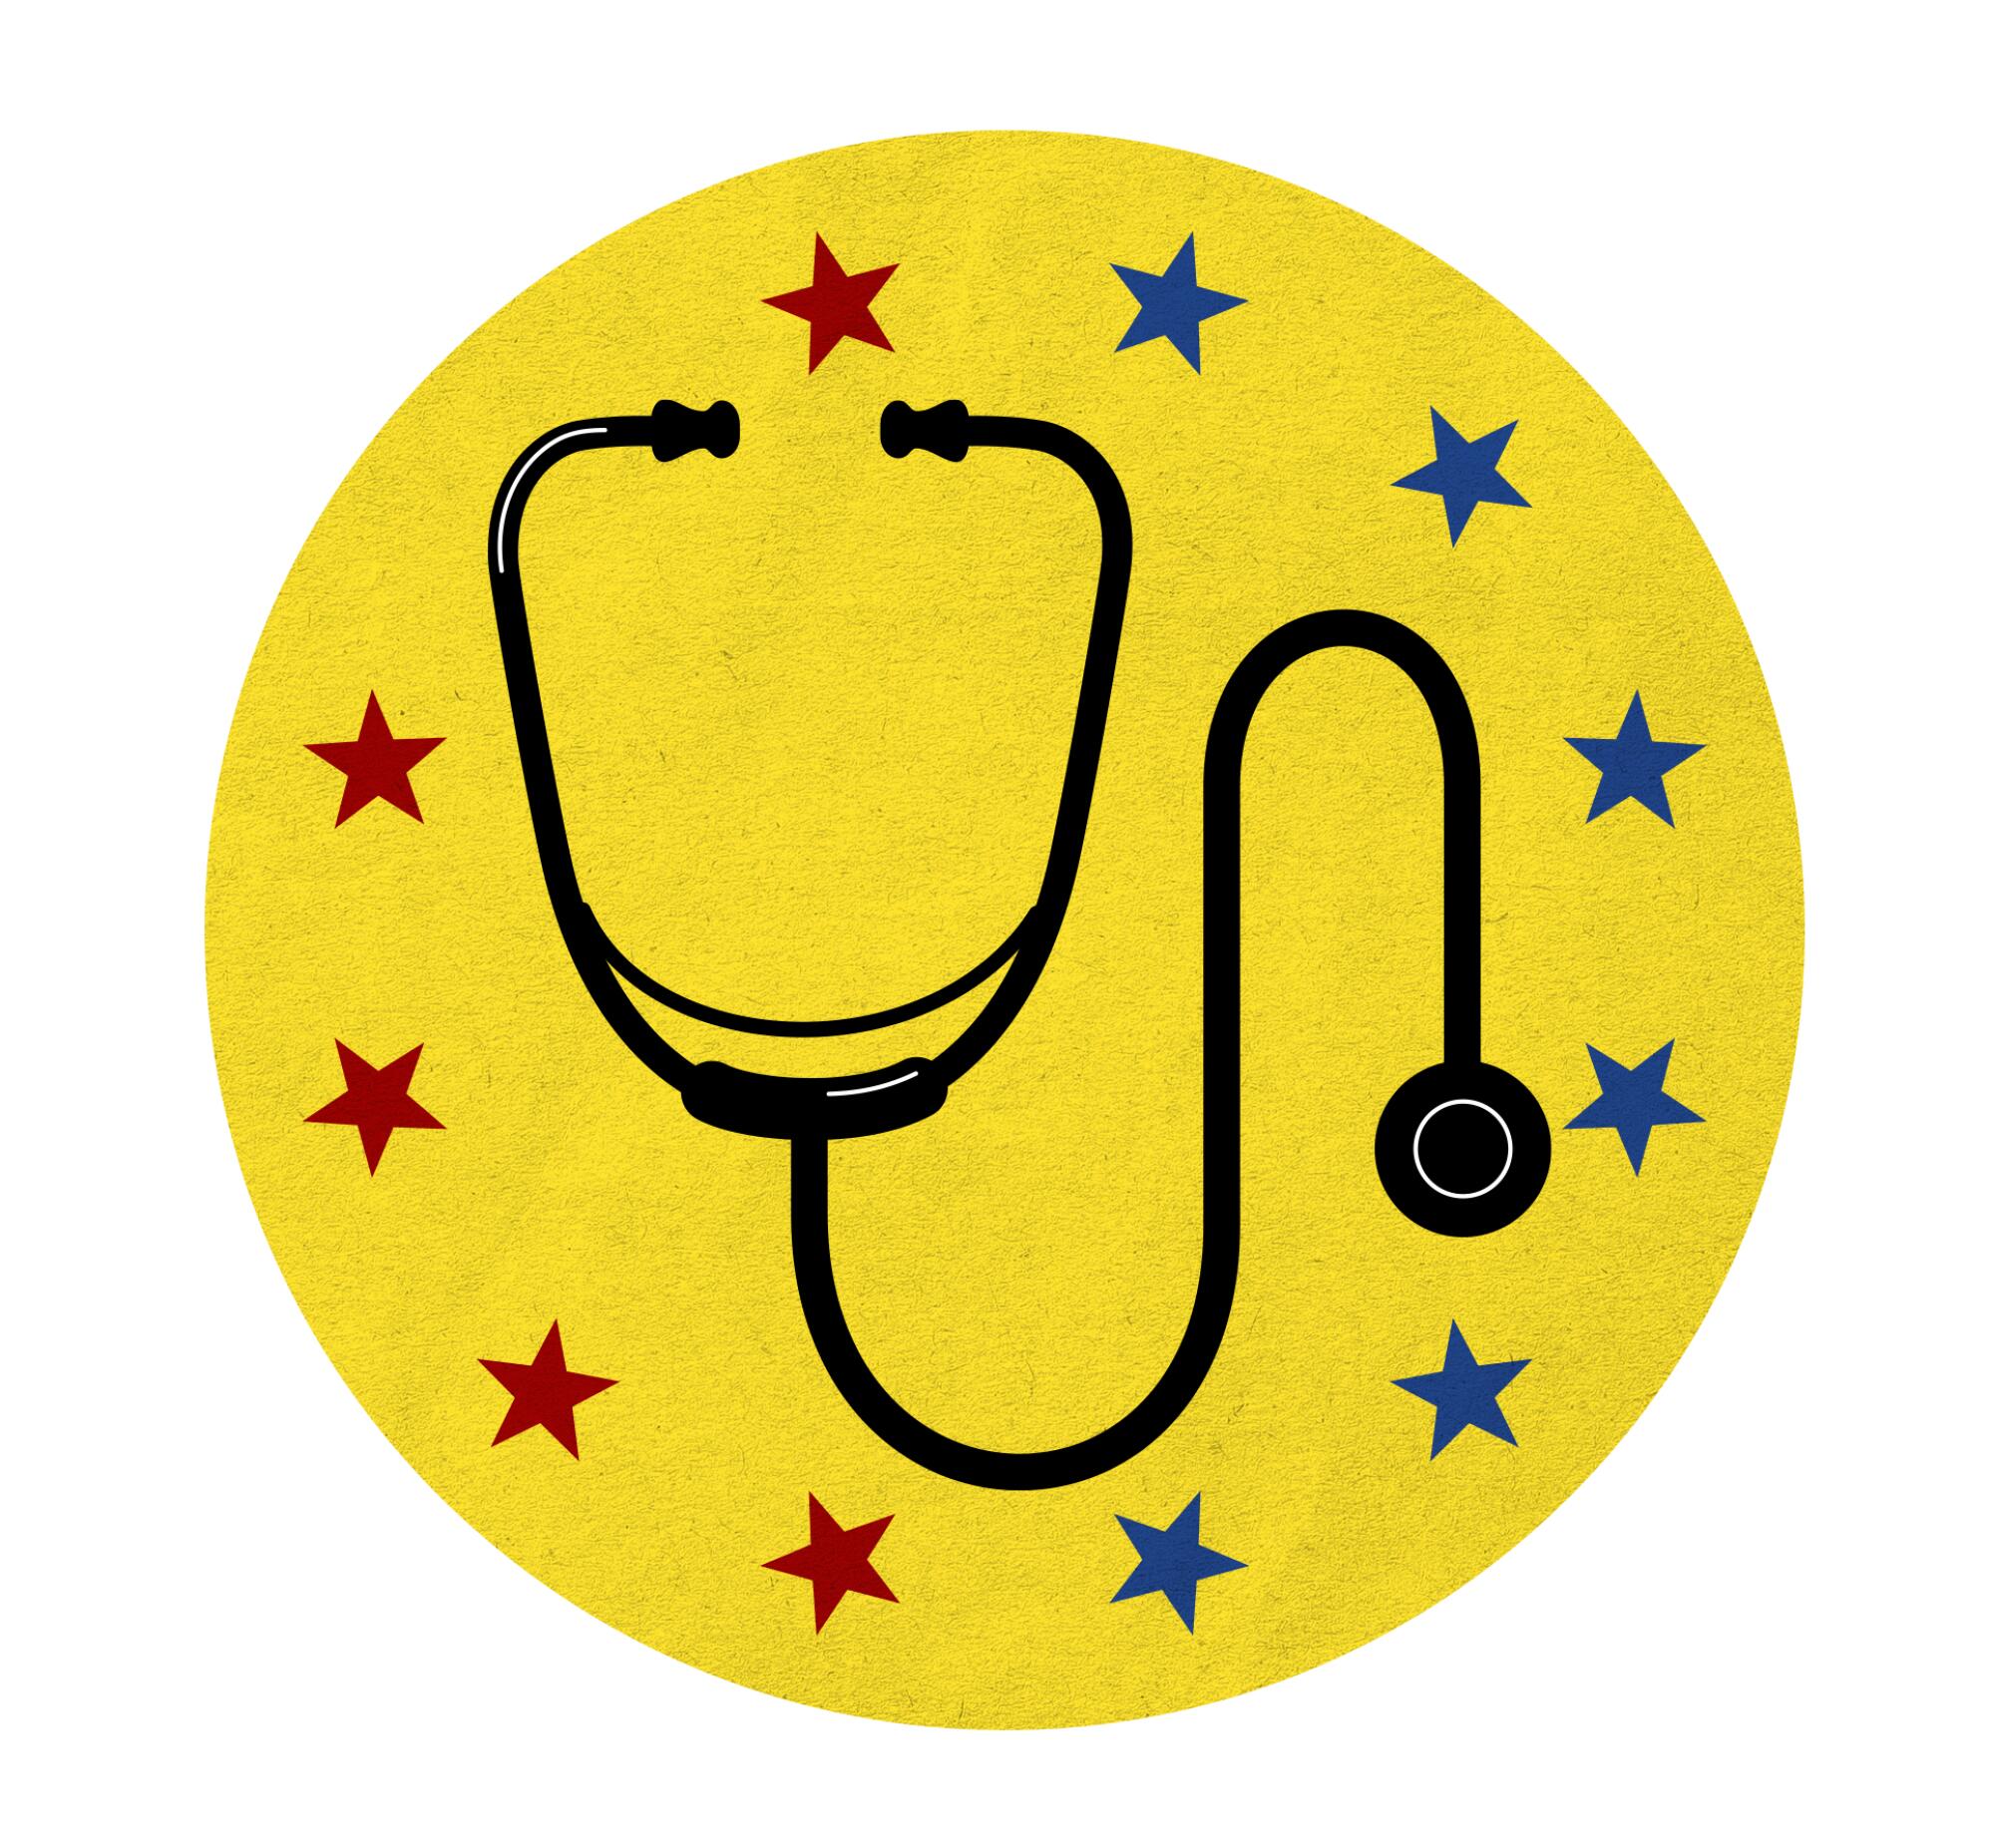 Stethoscope in a yellow circle with stars